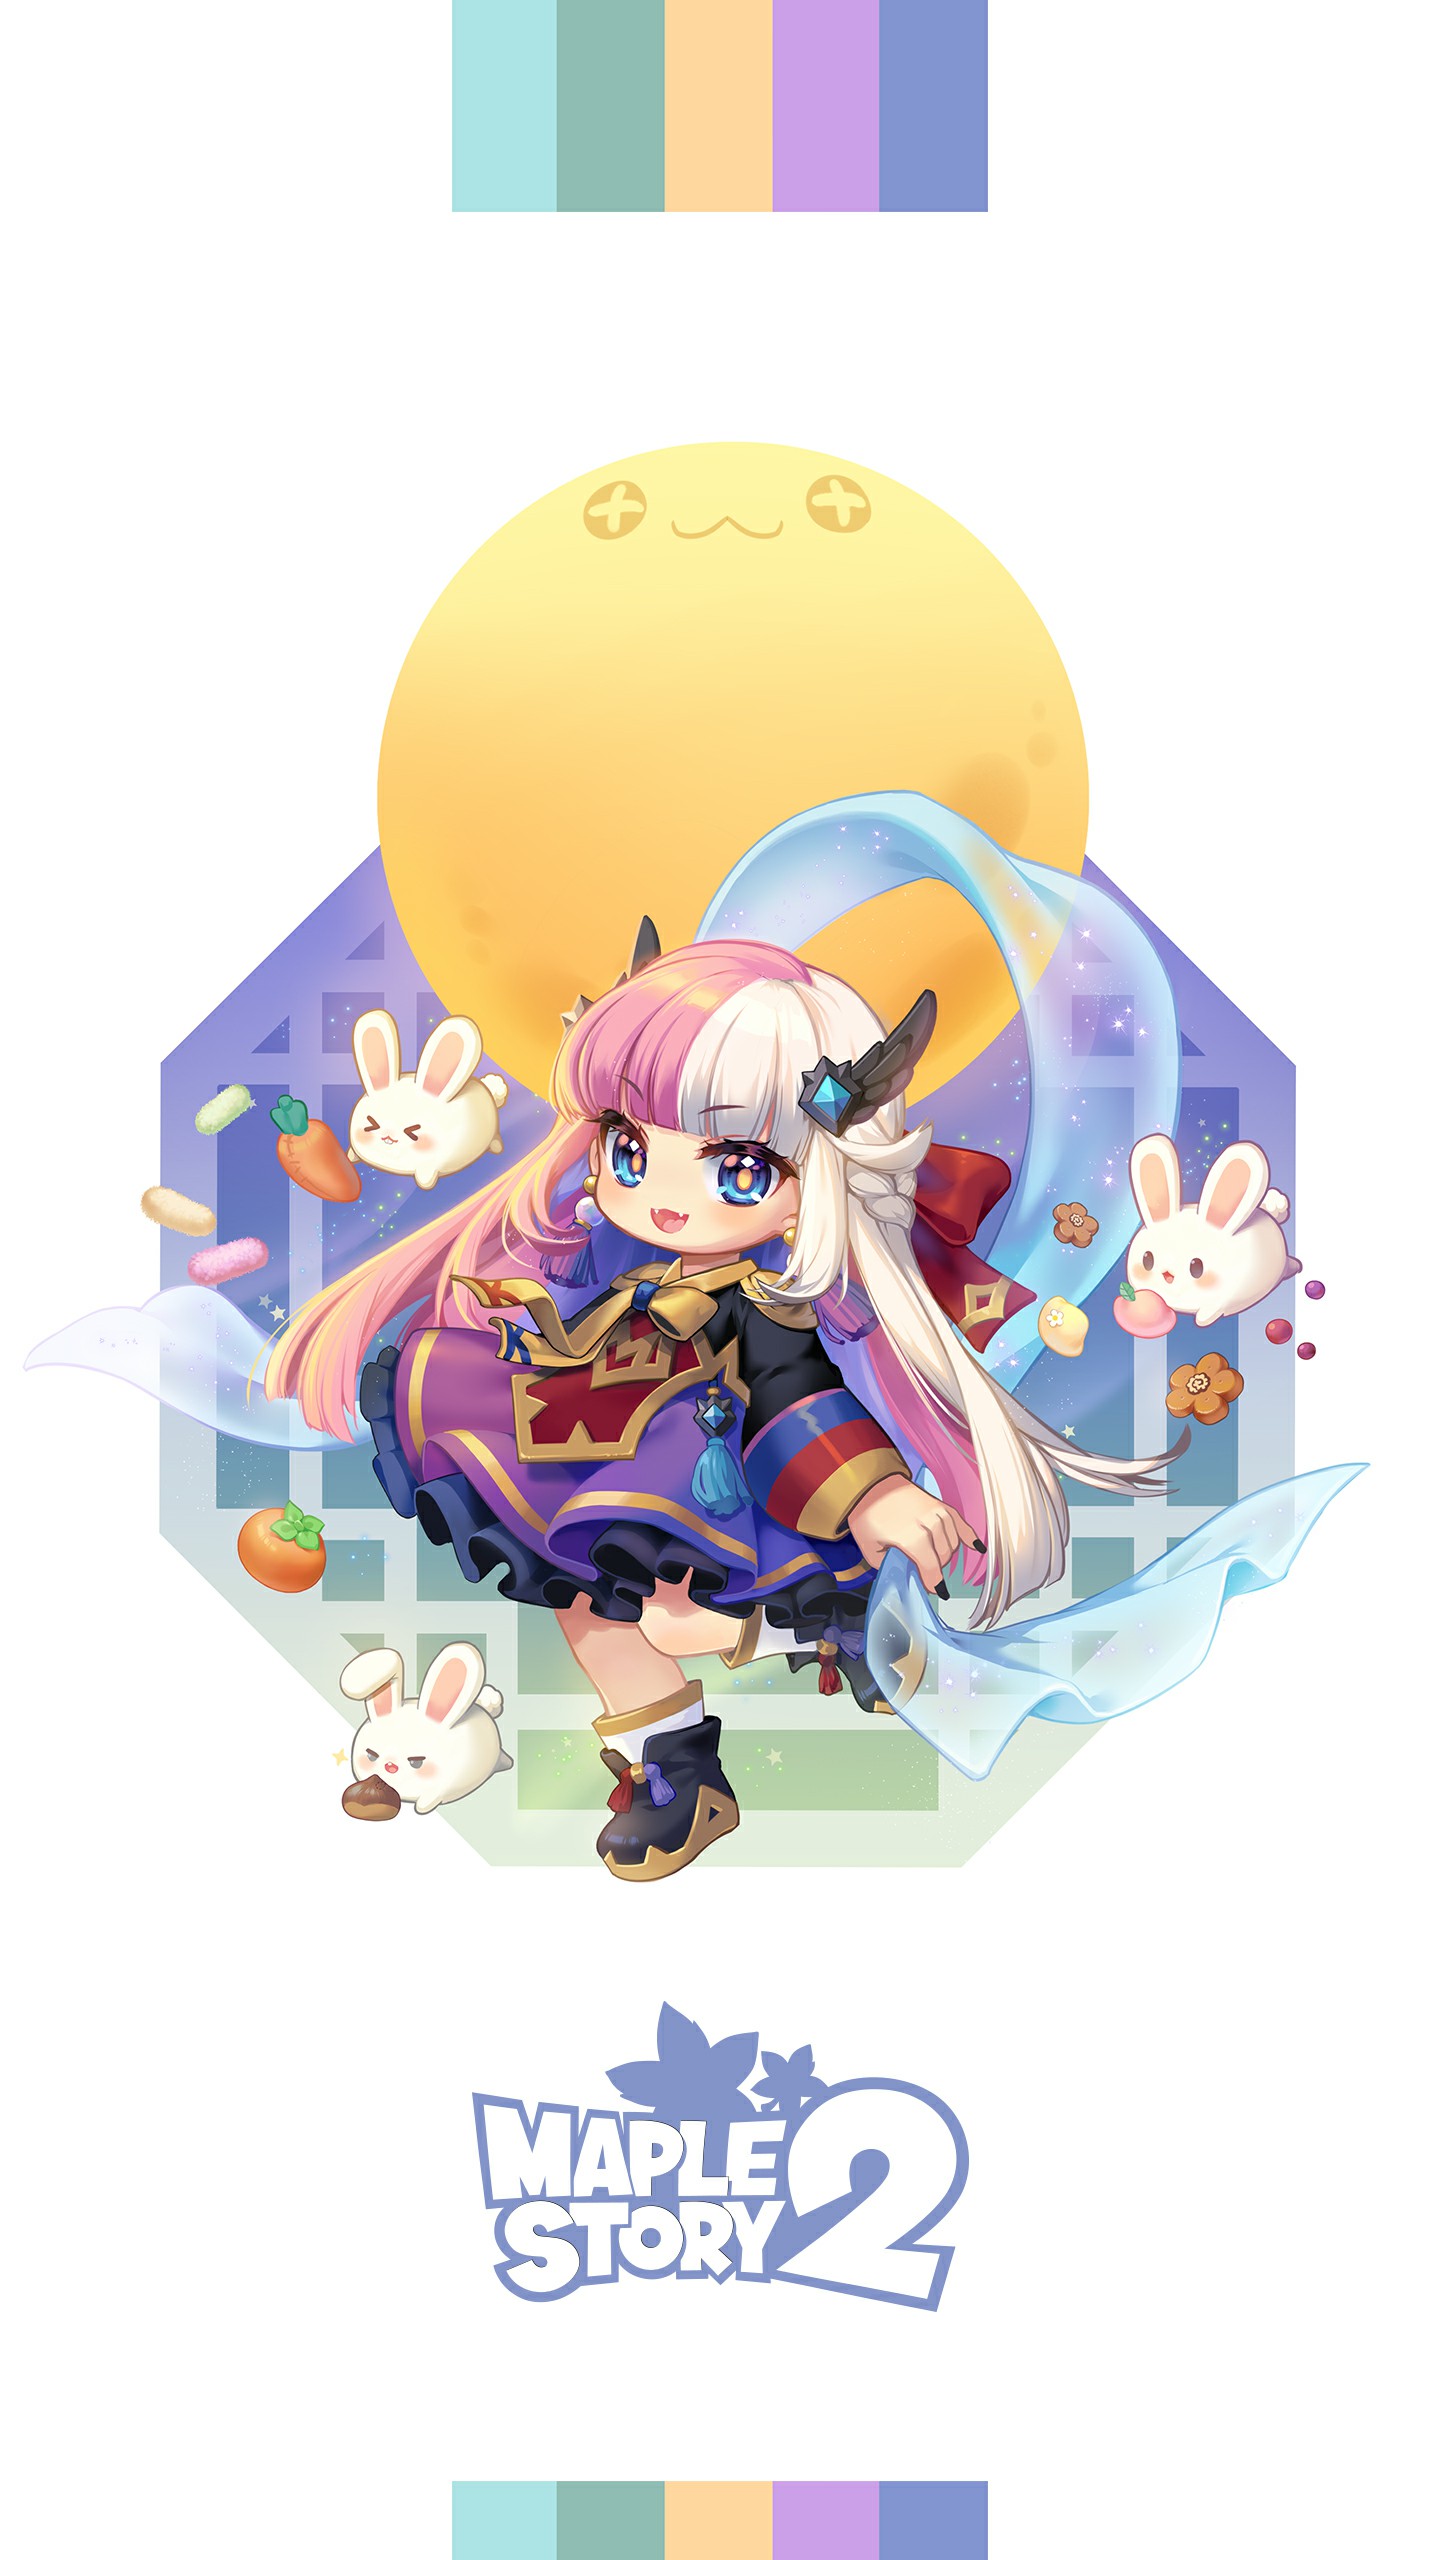 Autumn-themed MapleStory 2 wallpapers